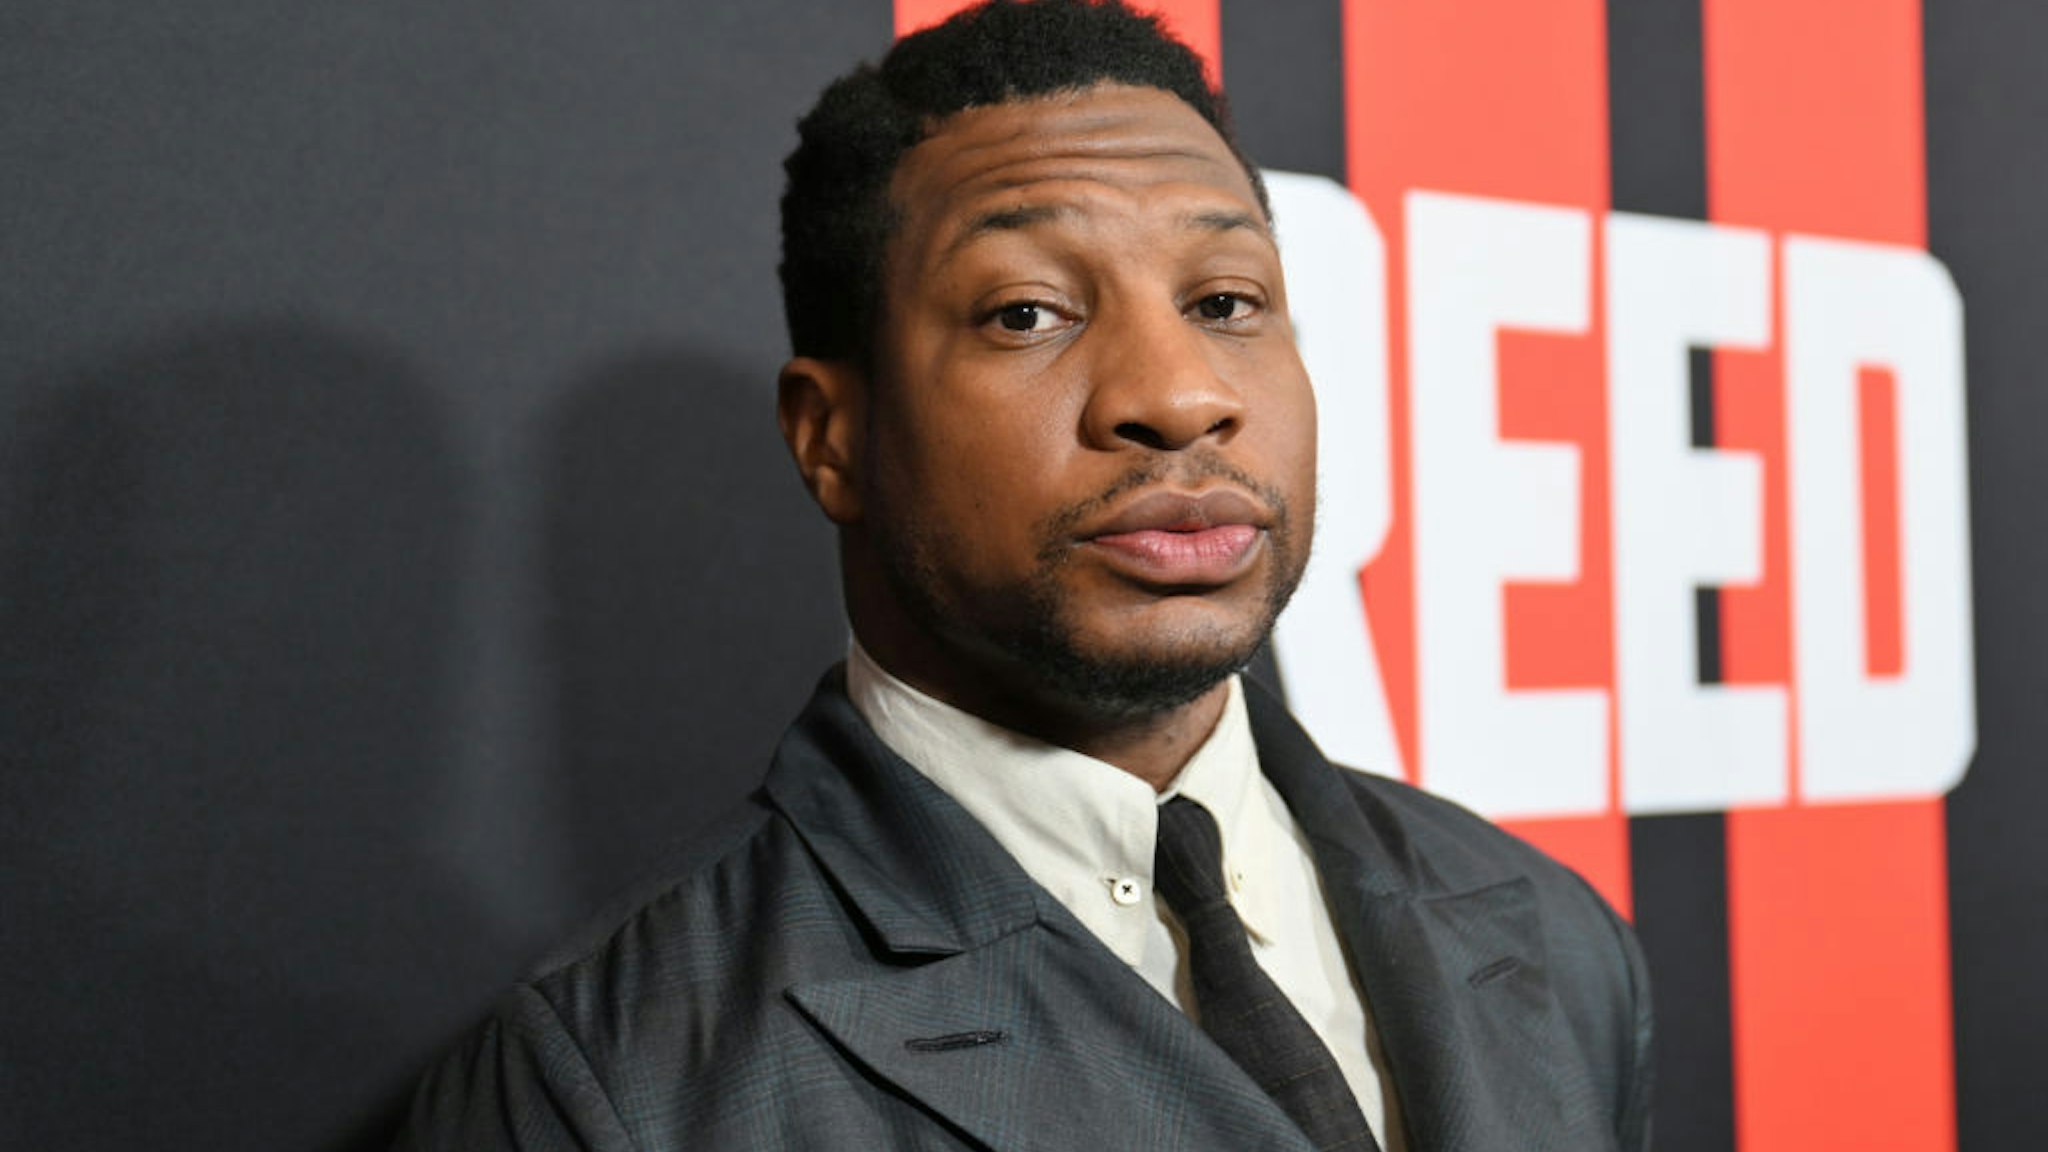 ATLANTA, GEORGIA - FEBRUARY 23: Jonathan Majors attends the CREED III HBCU fan screening presented by MGM Studios at Regal Atlantic Station on February 23, 2023 in Atlanta, Georgia. (Photo by Paras Griffin/Getty Images for MGM Studios)